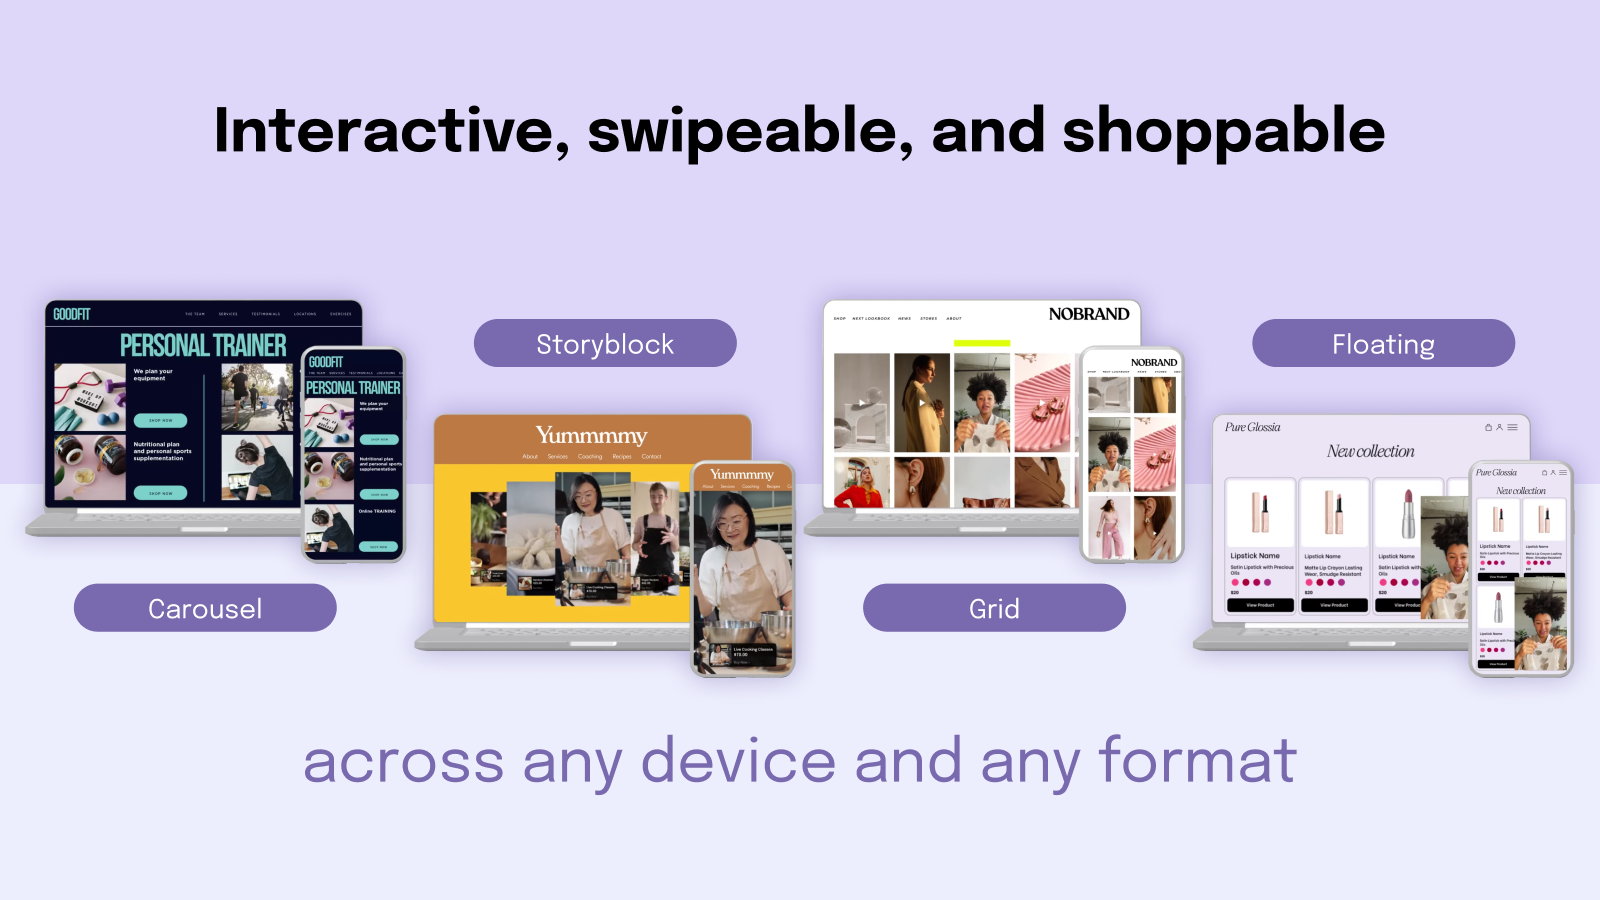 Interactive, swipeable, and shoppable